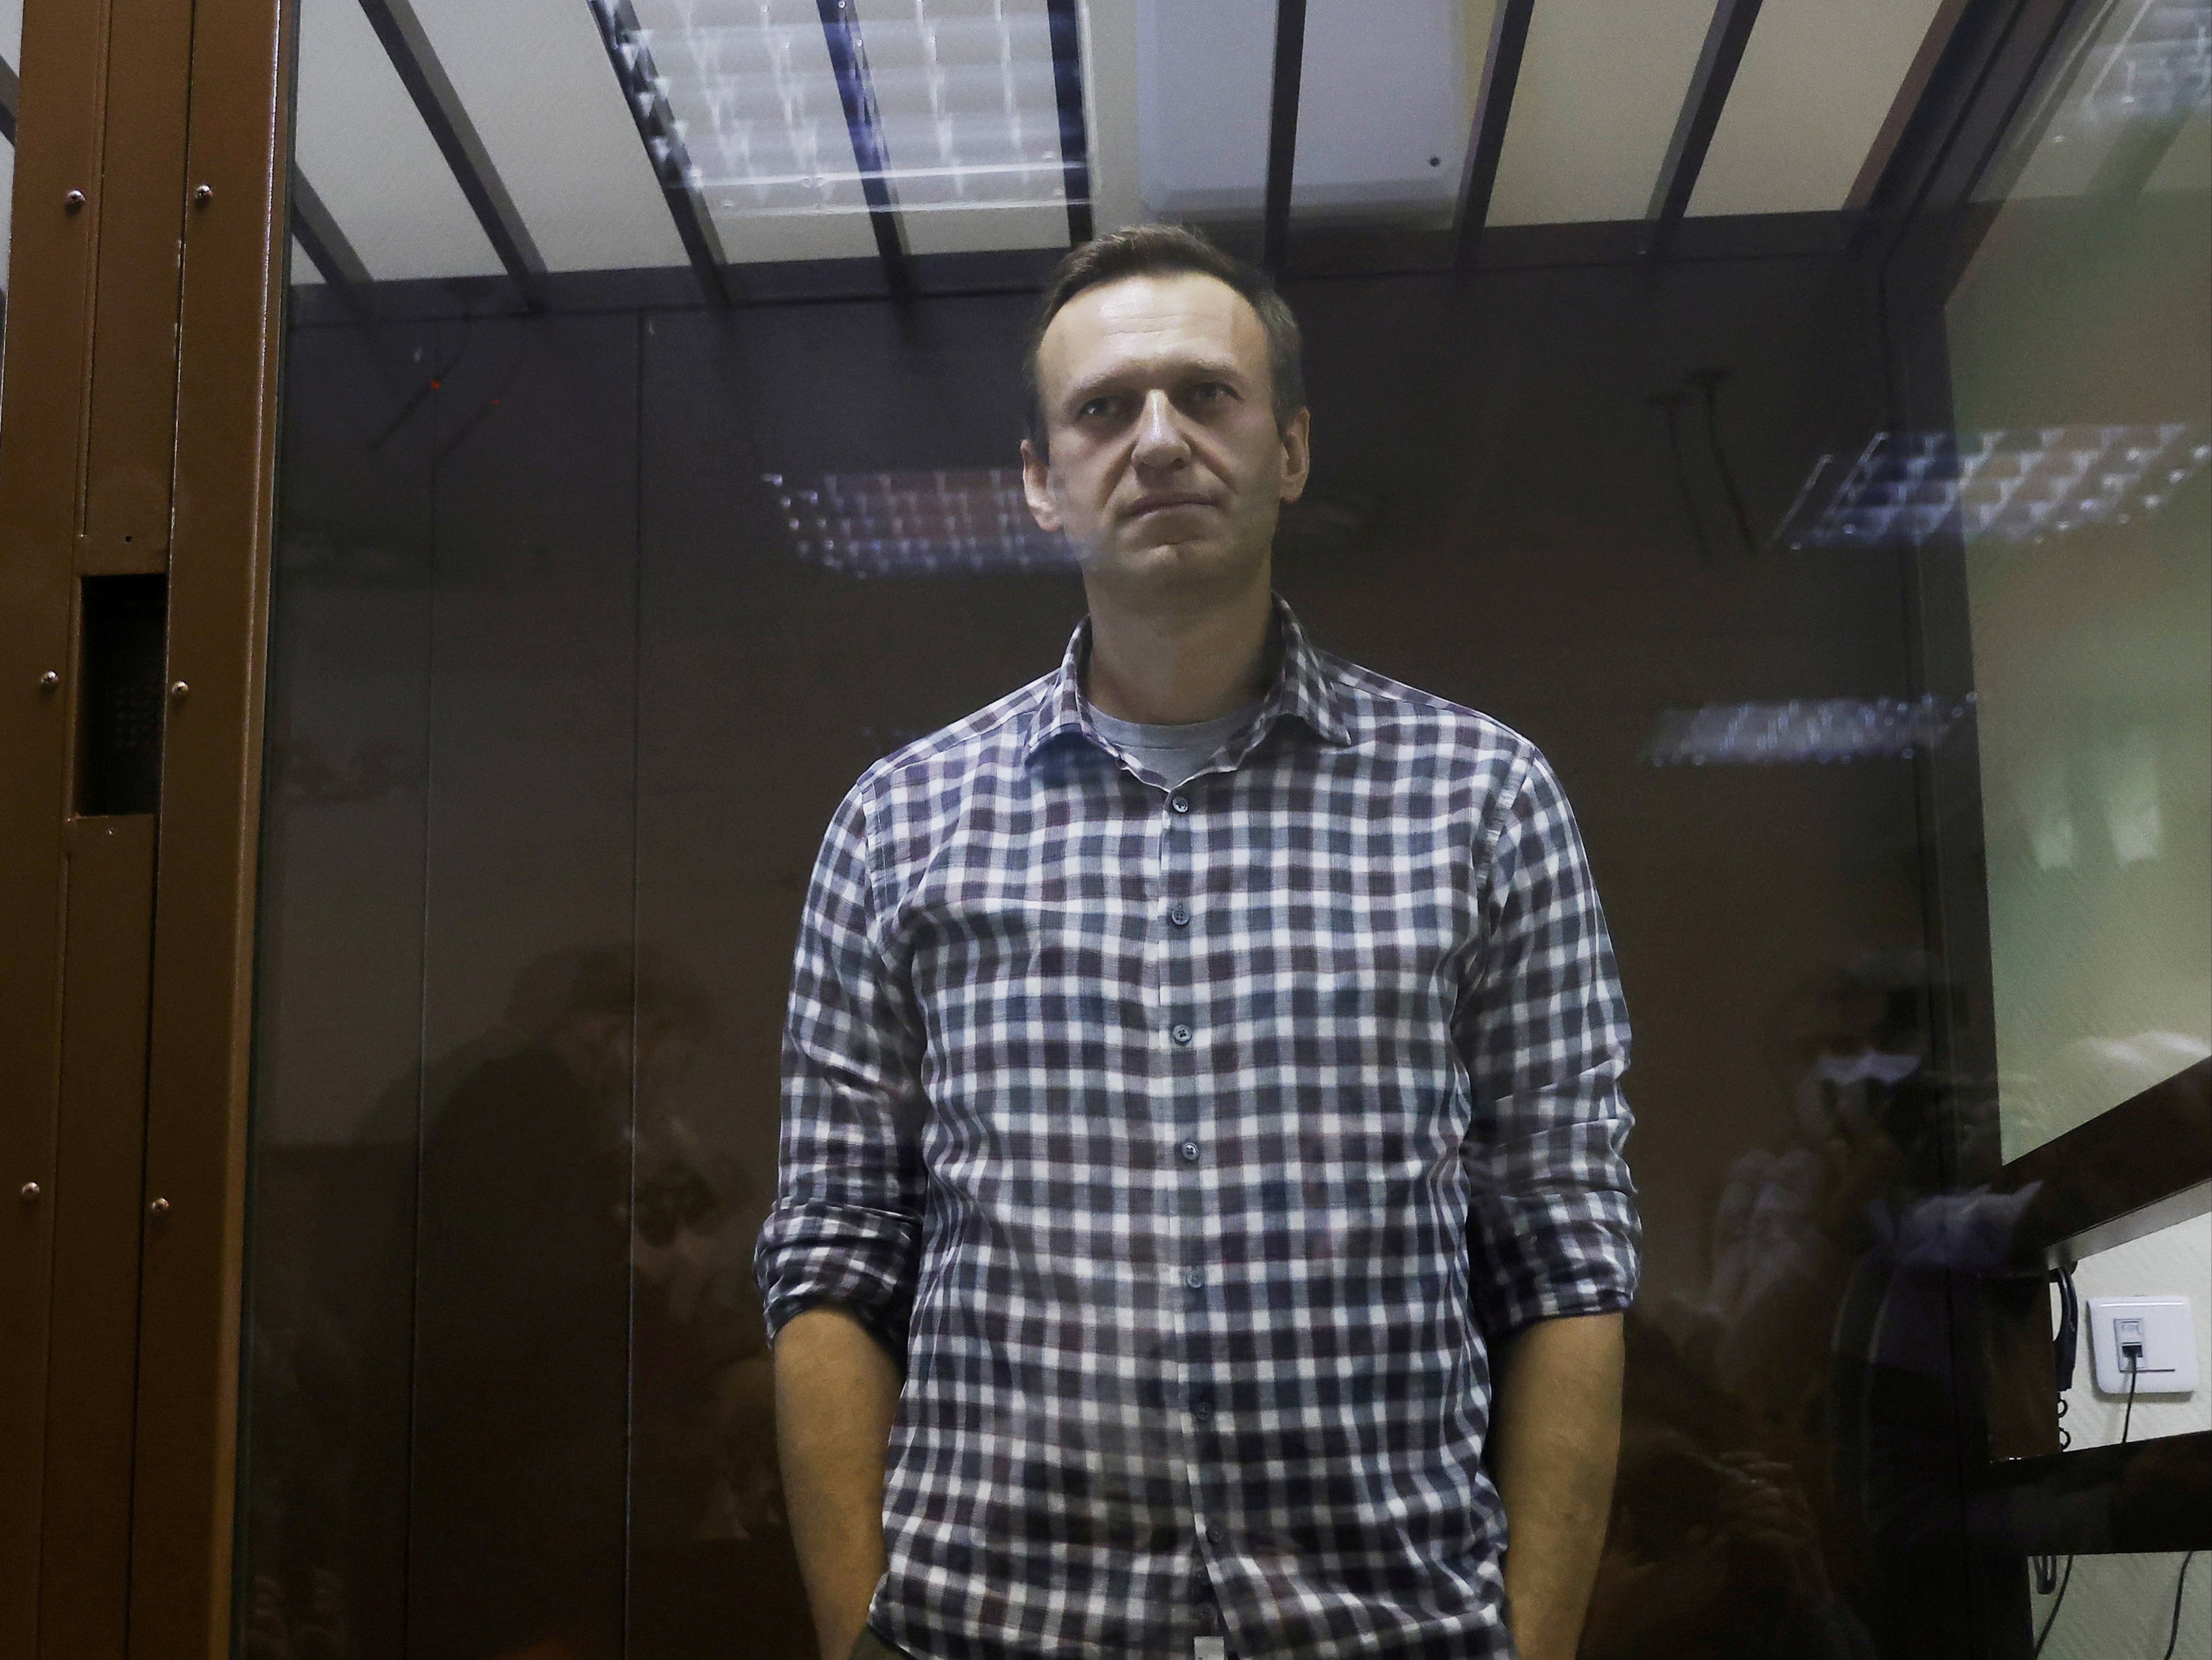 Alexei Navalny was arrested in January upon his return from Germany, where he had been recovering from a nerve-agent poisoning